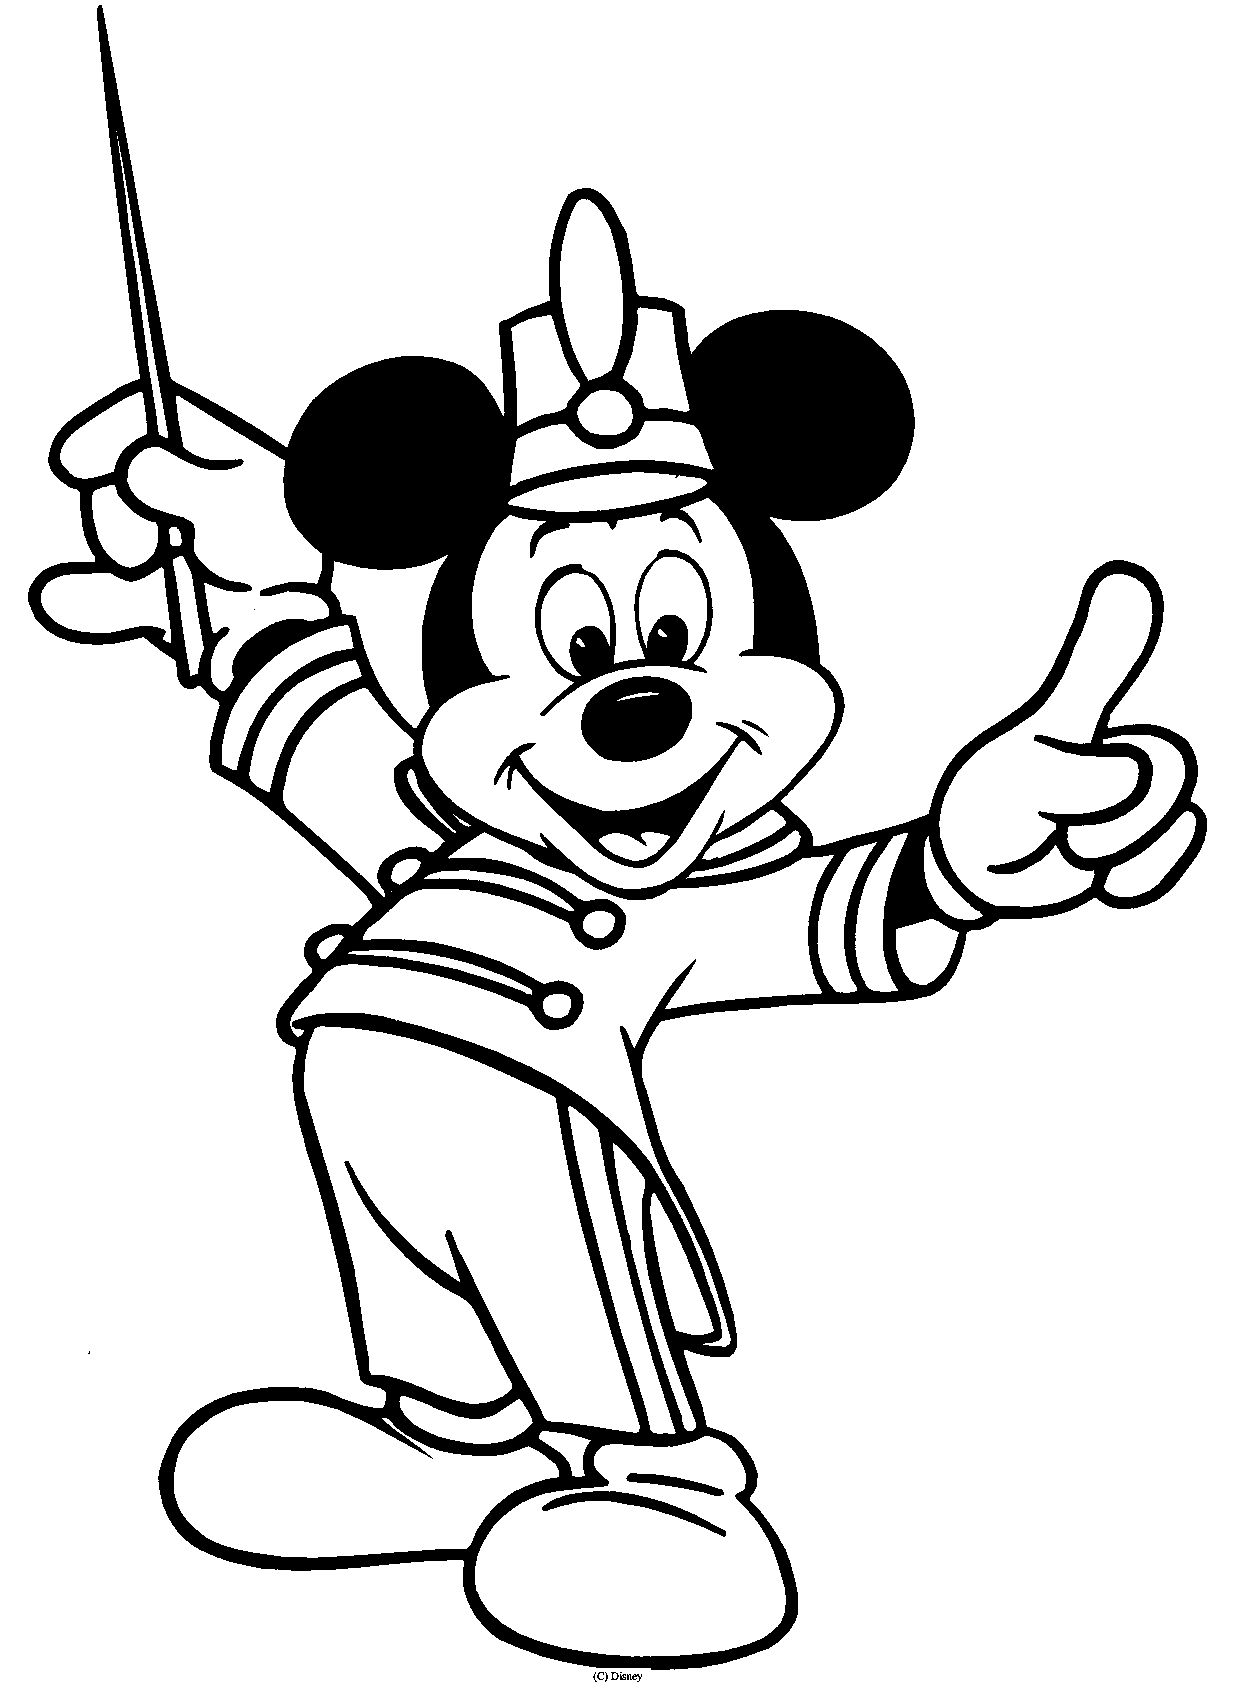 Baby mickey mouse clipart black and white free